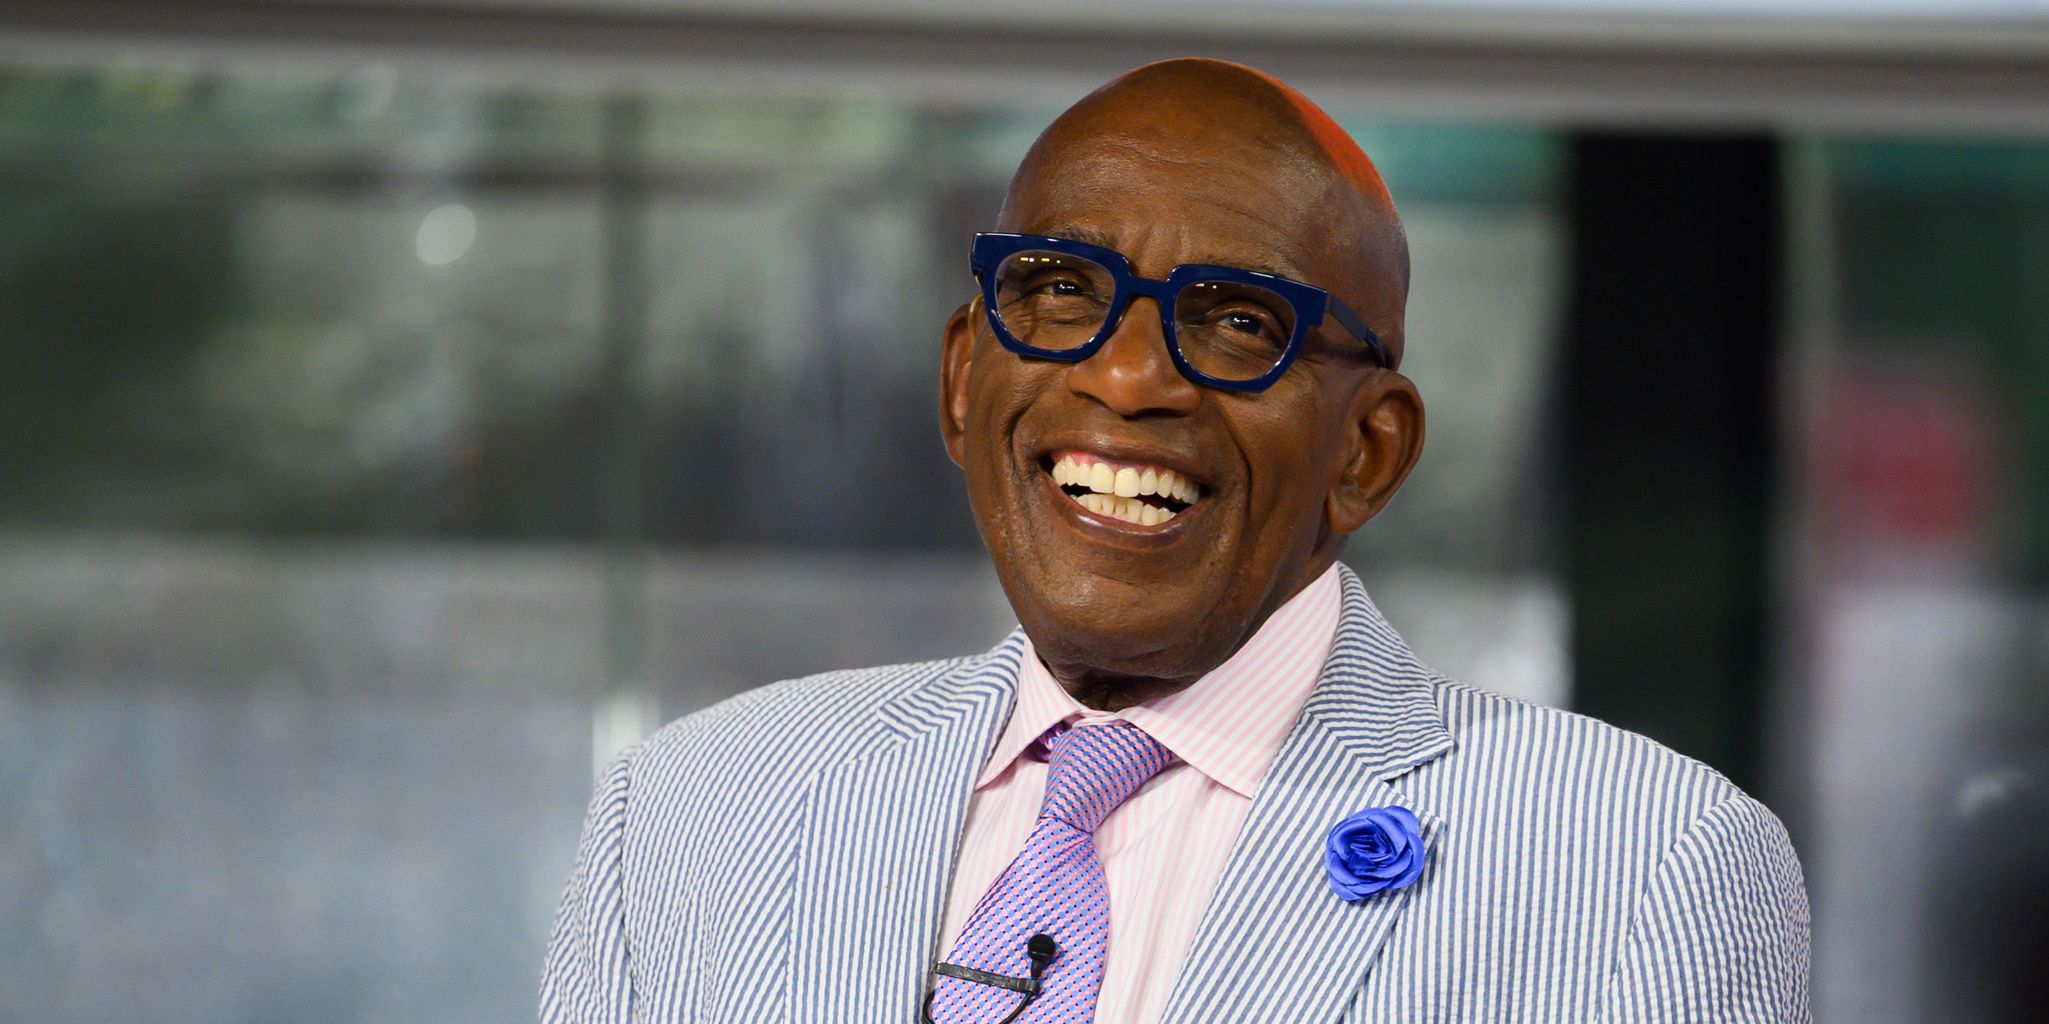 Al Roker, 68, Re-Hospitalized After Being Treated for Blood Clots